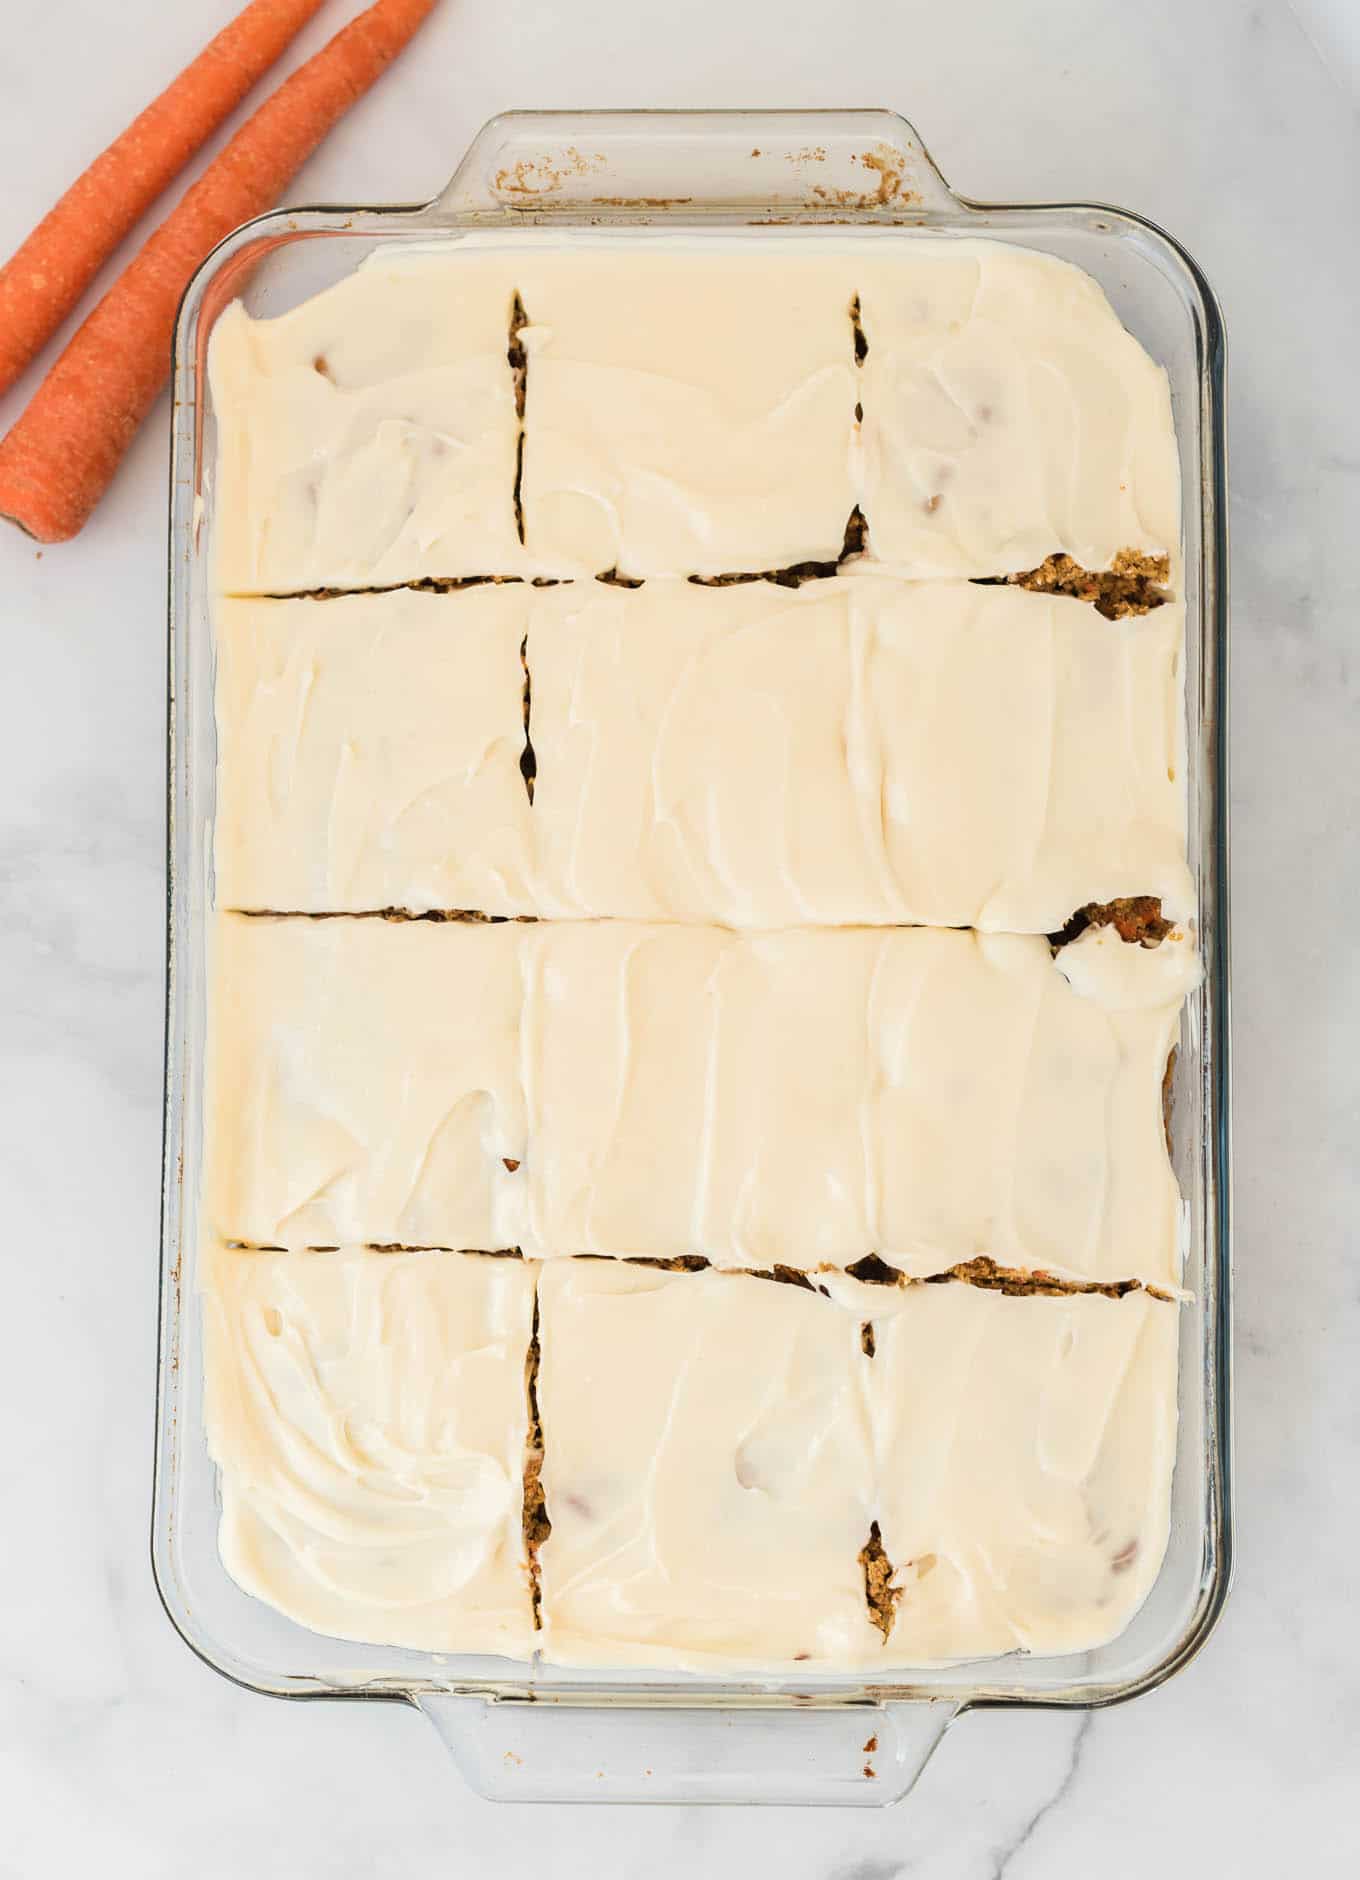 carrot cake sliced into 12 pieces